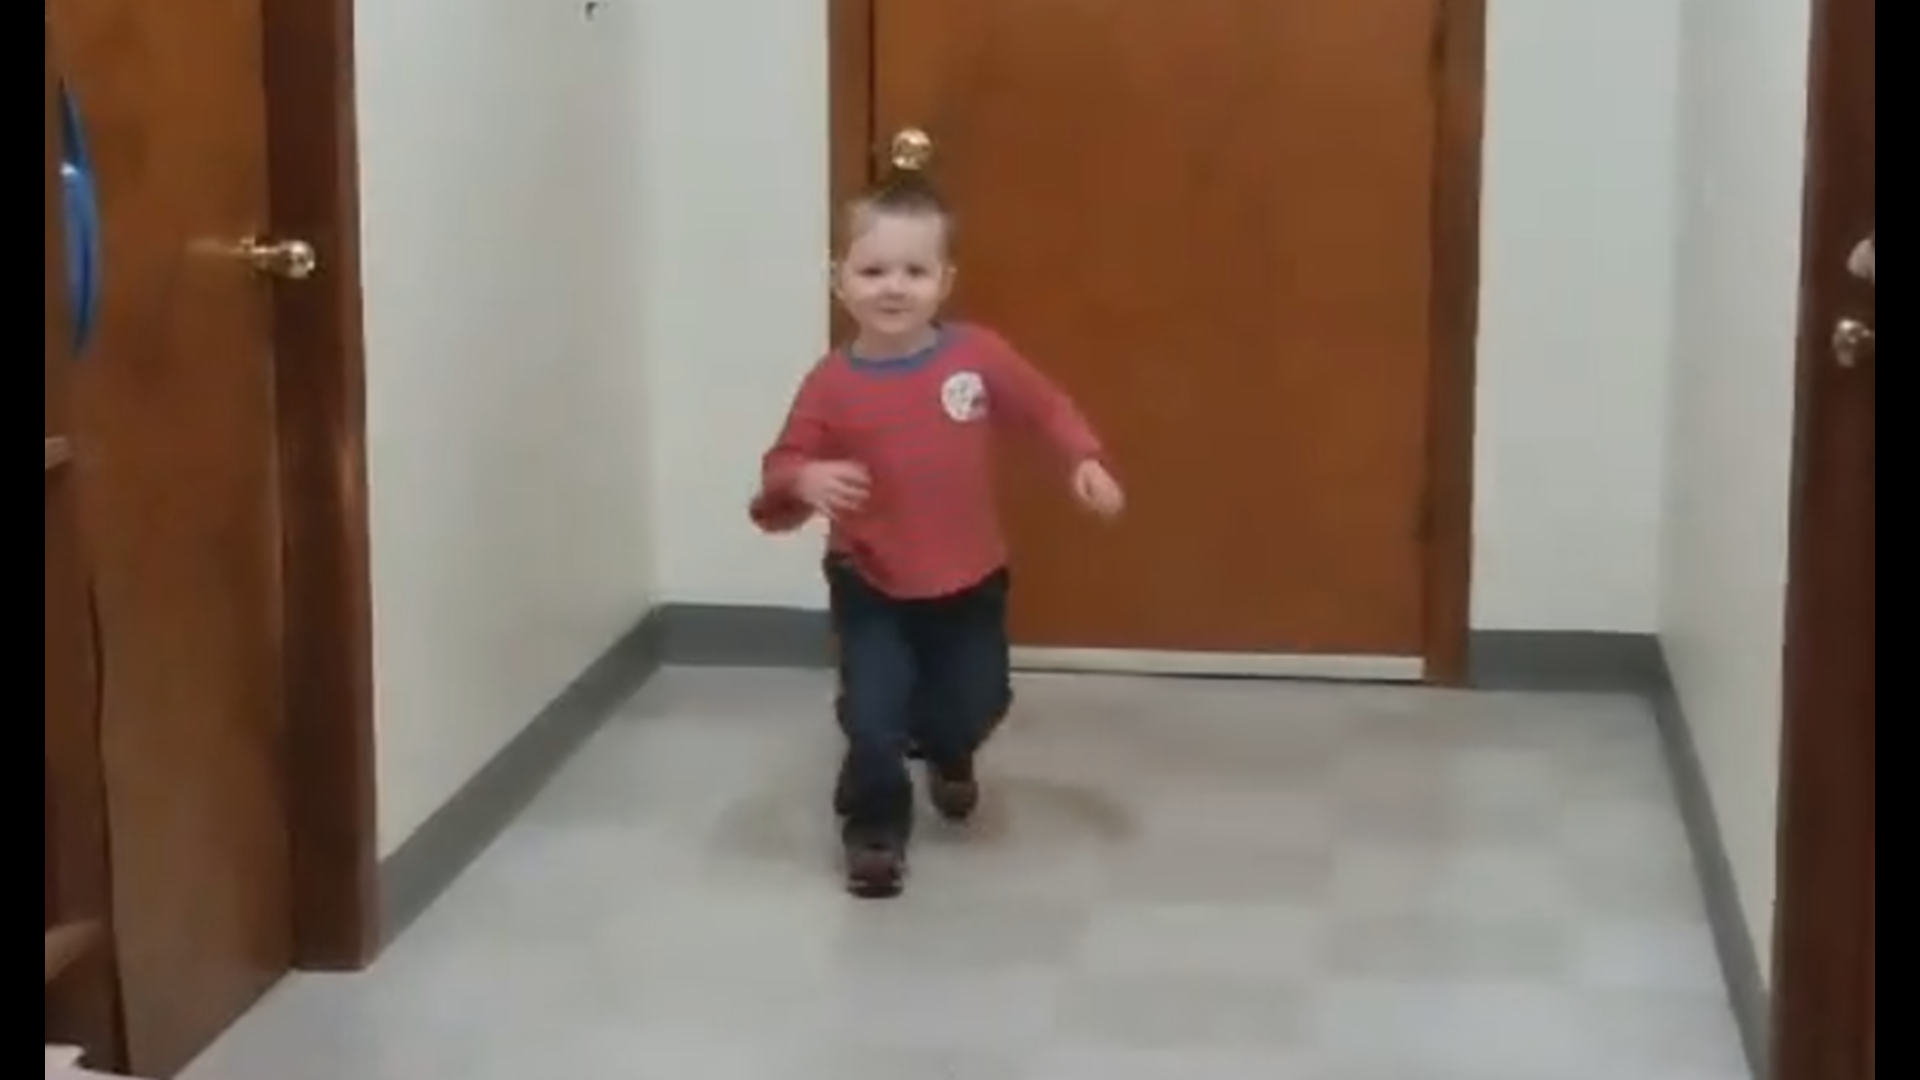 Enoch McGovern running down a hallway, laughing.